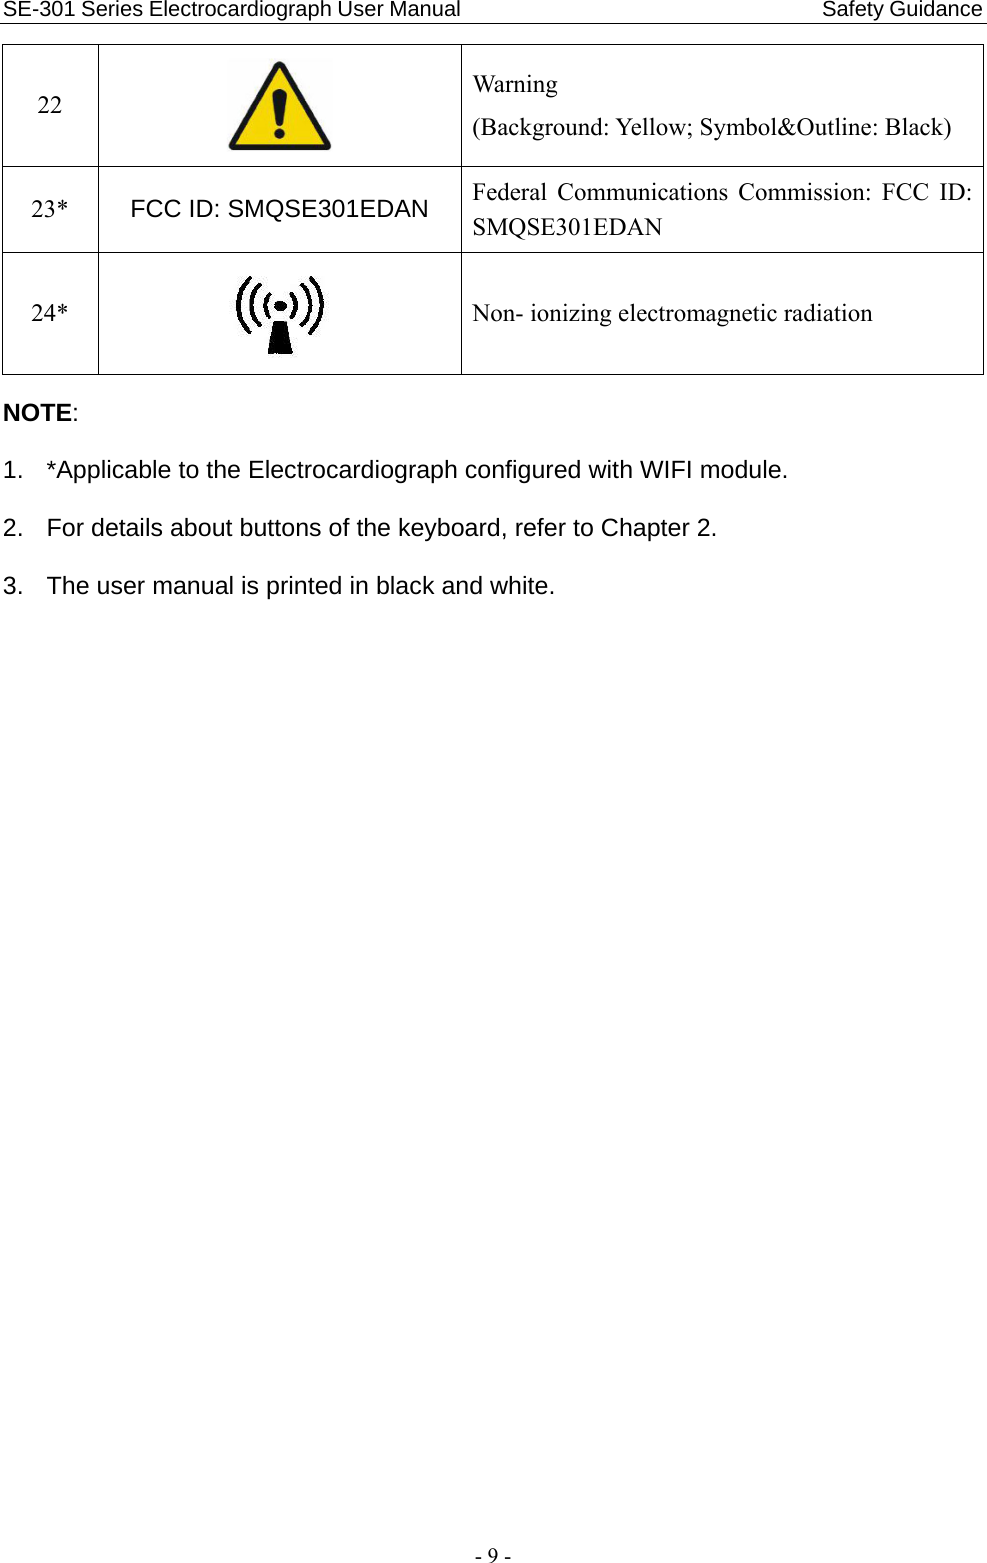 SE-301 Series Electrocardiograph User Manual                                 Safety Guidance - 9 - 22  Warning (Background: Yellow; Symbol&amp;Outline: Black) 23*  FCC ID: SMQSE301EDAN Federal Communications Commission: FCC ID: SMQSE301EDAN 24*  Non- ionizing electromagnetic radiation NOTE: 1.  *Applicable to the Electrocardiograph configured with WIFI module. 2.  For details about buttons of the keyboard, refer to Chapter 2. 3.  The user manual is printed in black and white.    